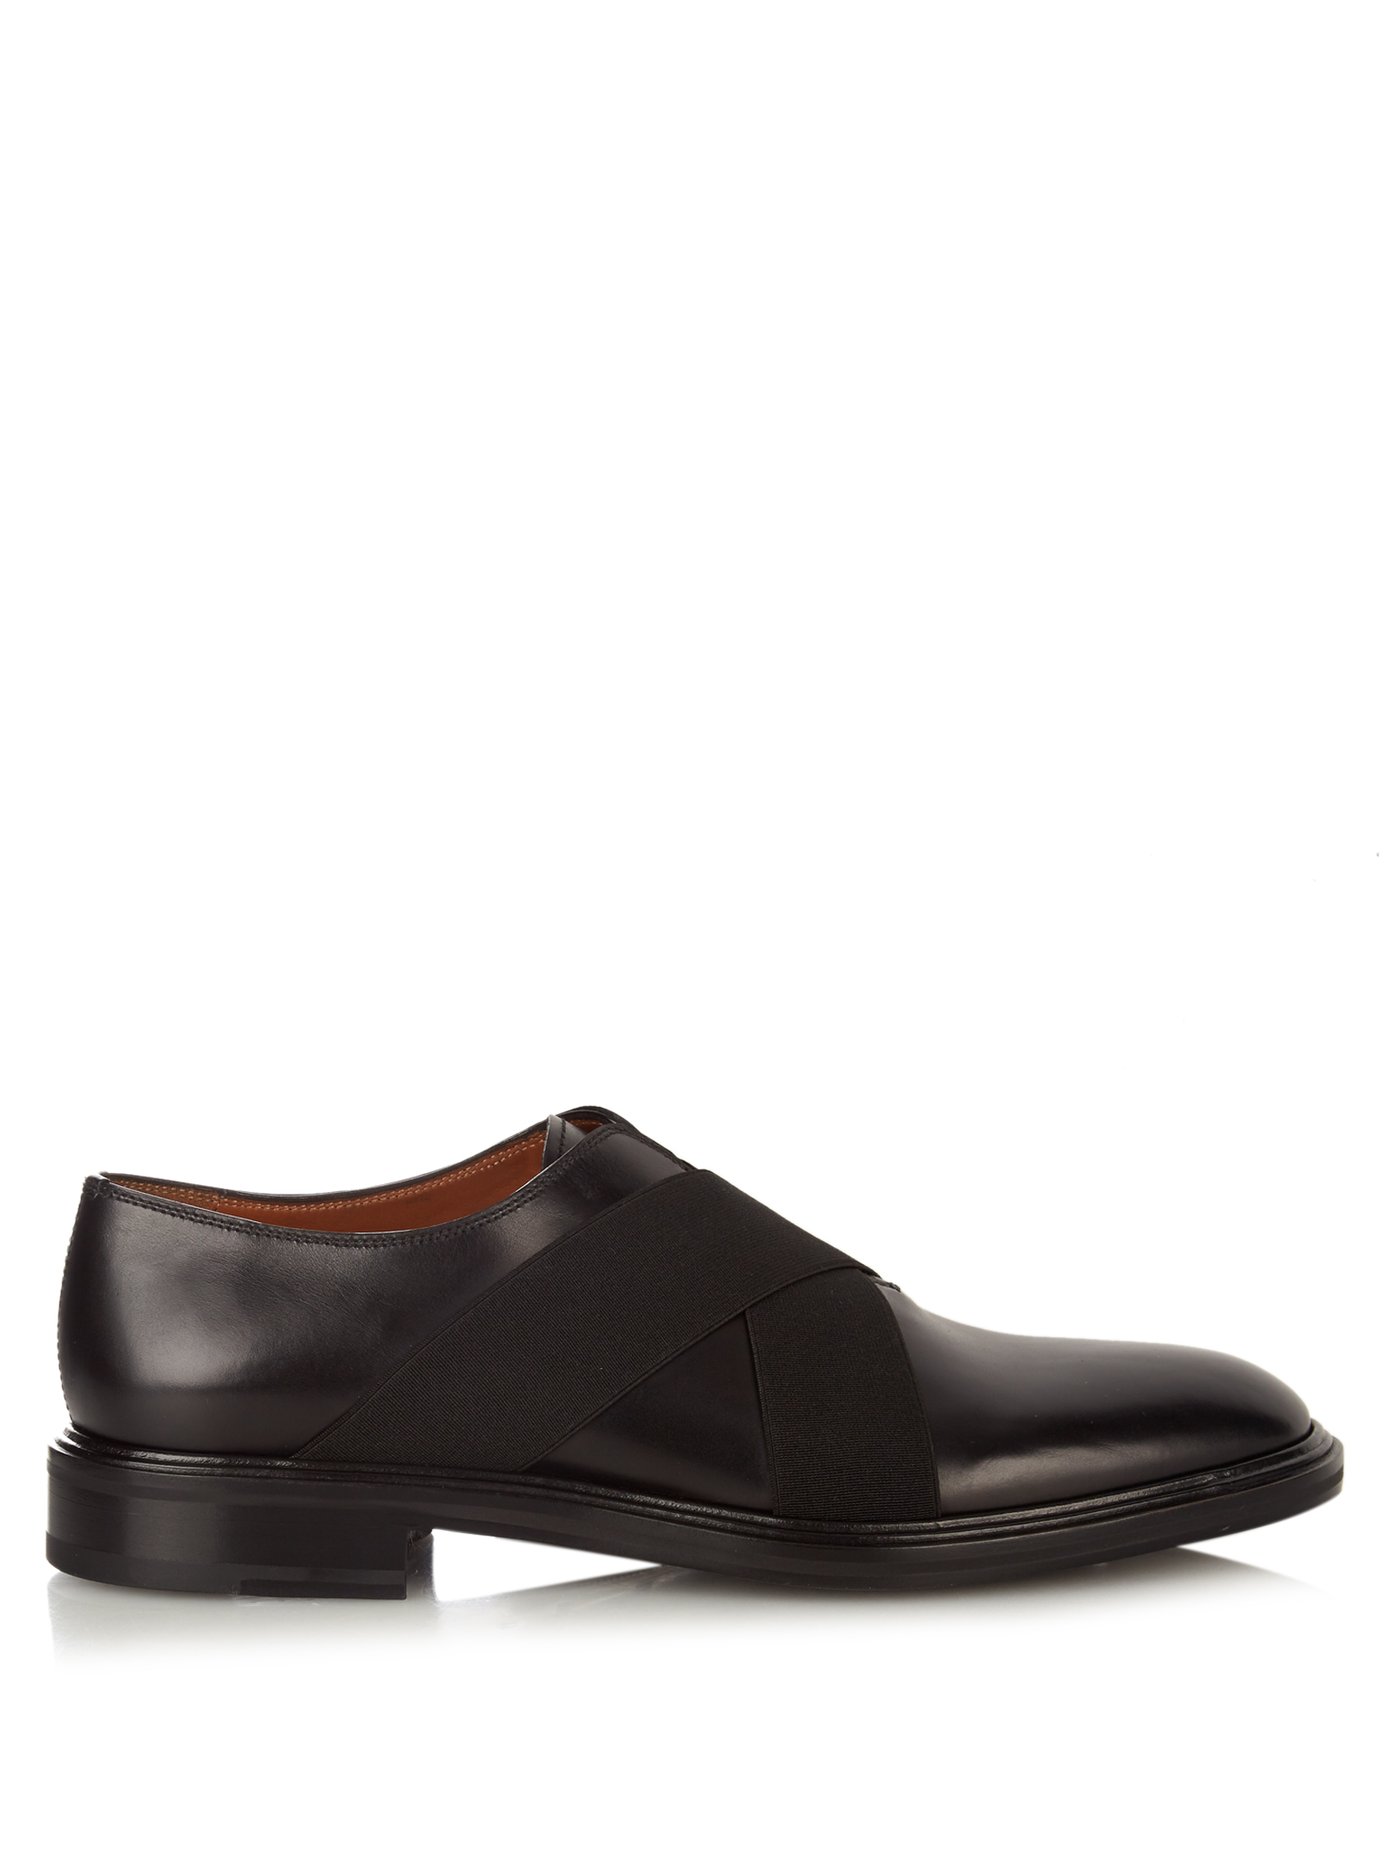 Leather slip-on dress shoes | Givenchy 